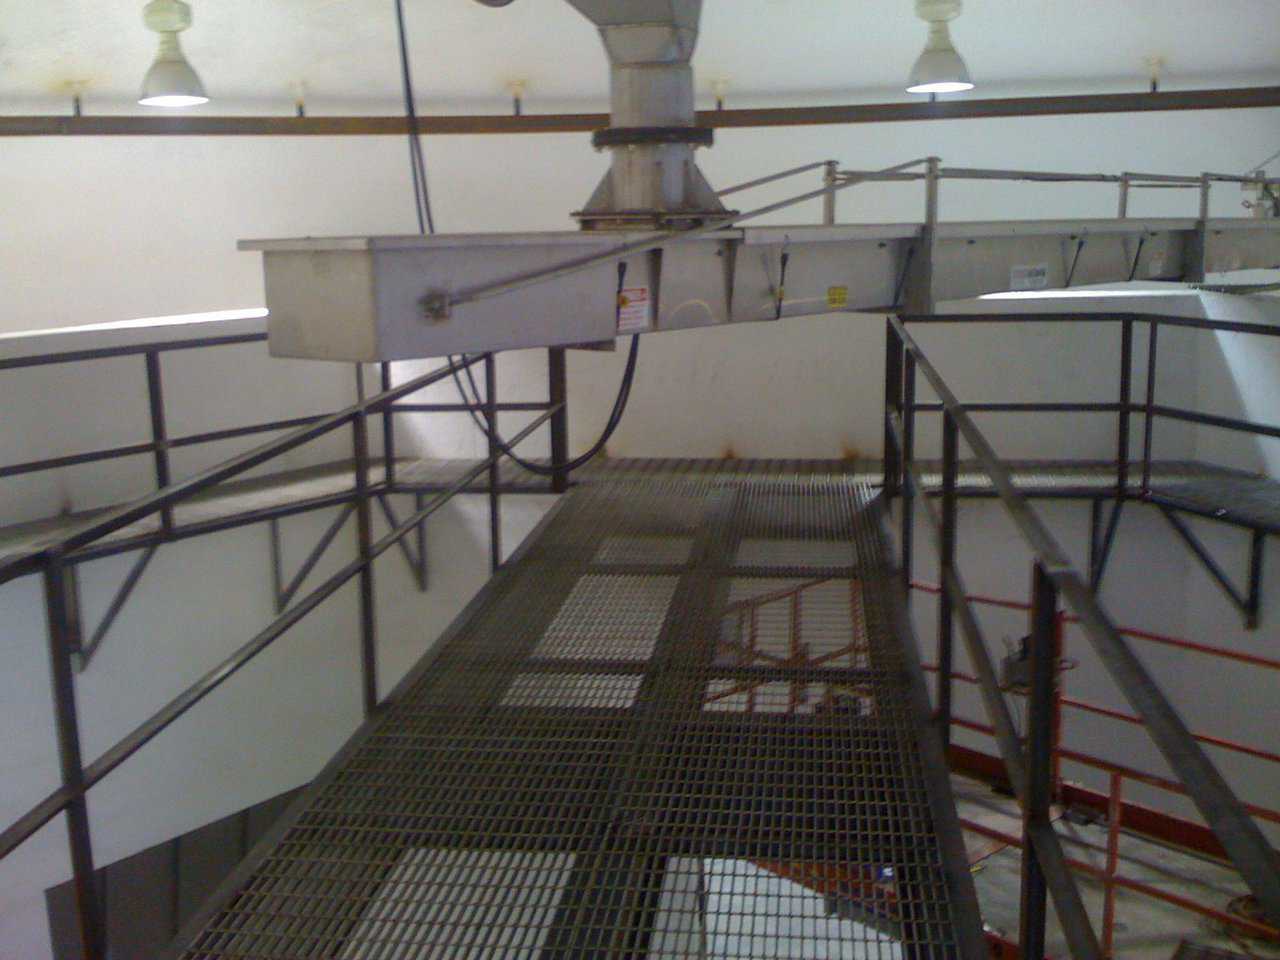 Taken from the catwalk — Its showing the rear portion of the rotating conveyor. It also shows the rail.  It’s hung from the dome that supports the far end of the rotating conveyor.  You can see across the bin wall into the bins.